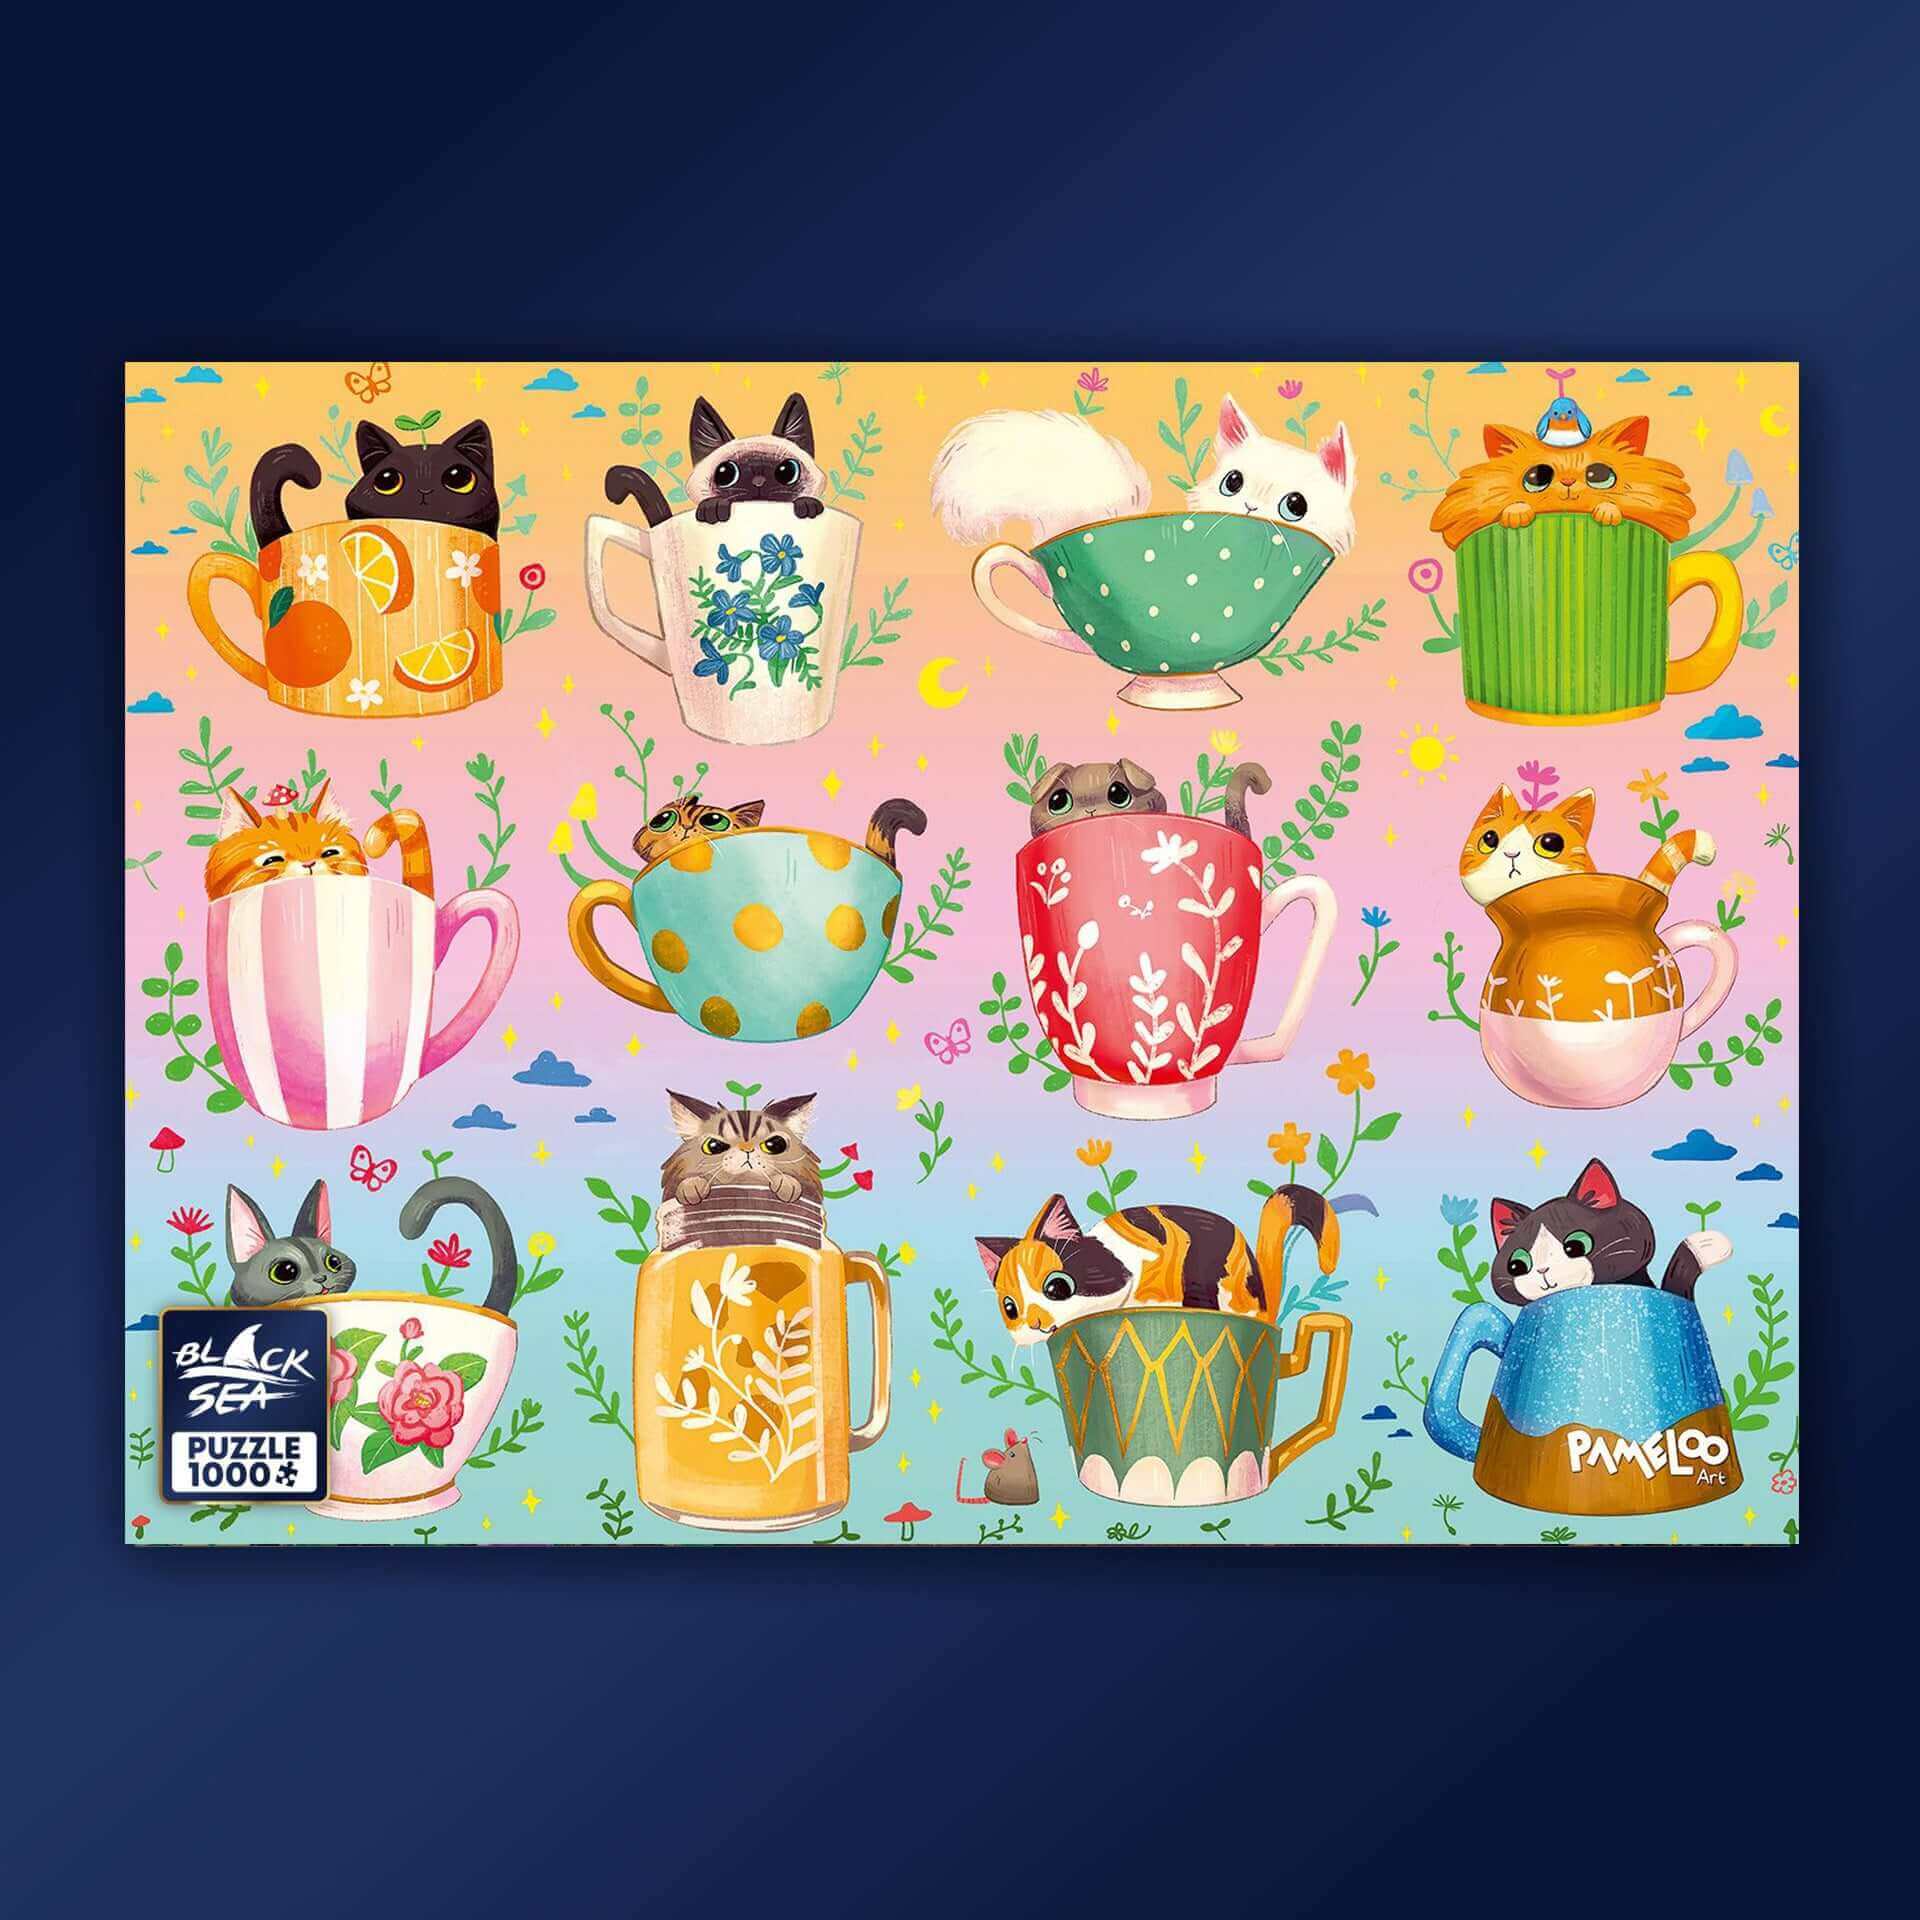 Cats in Windows 1000 Piece Jigsaw Puzzle